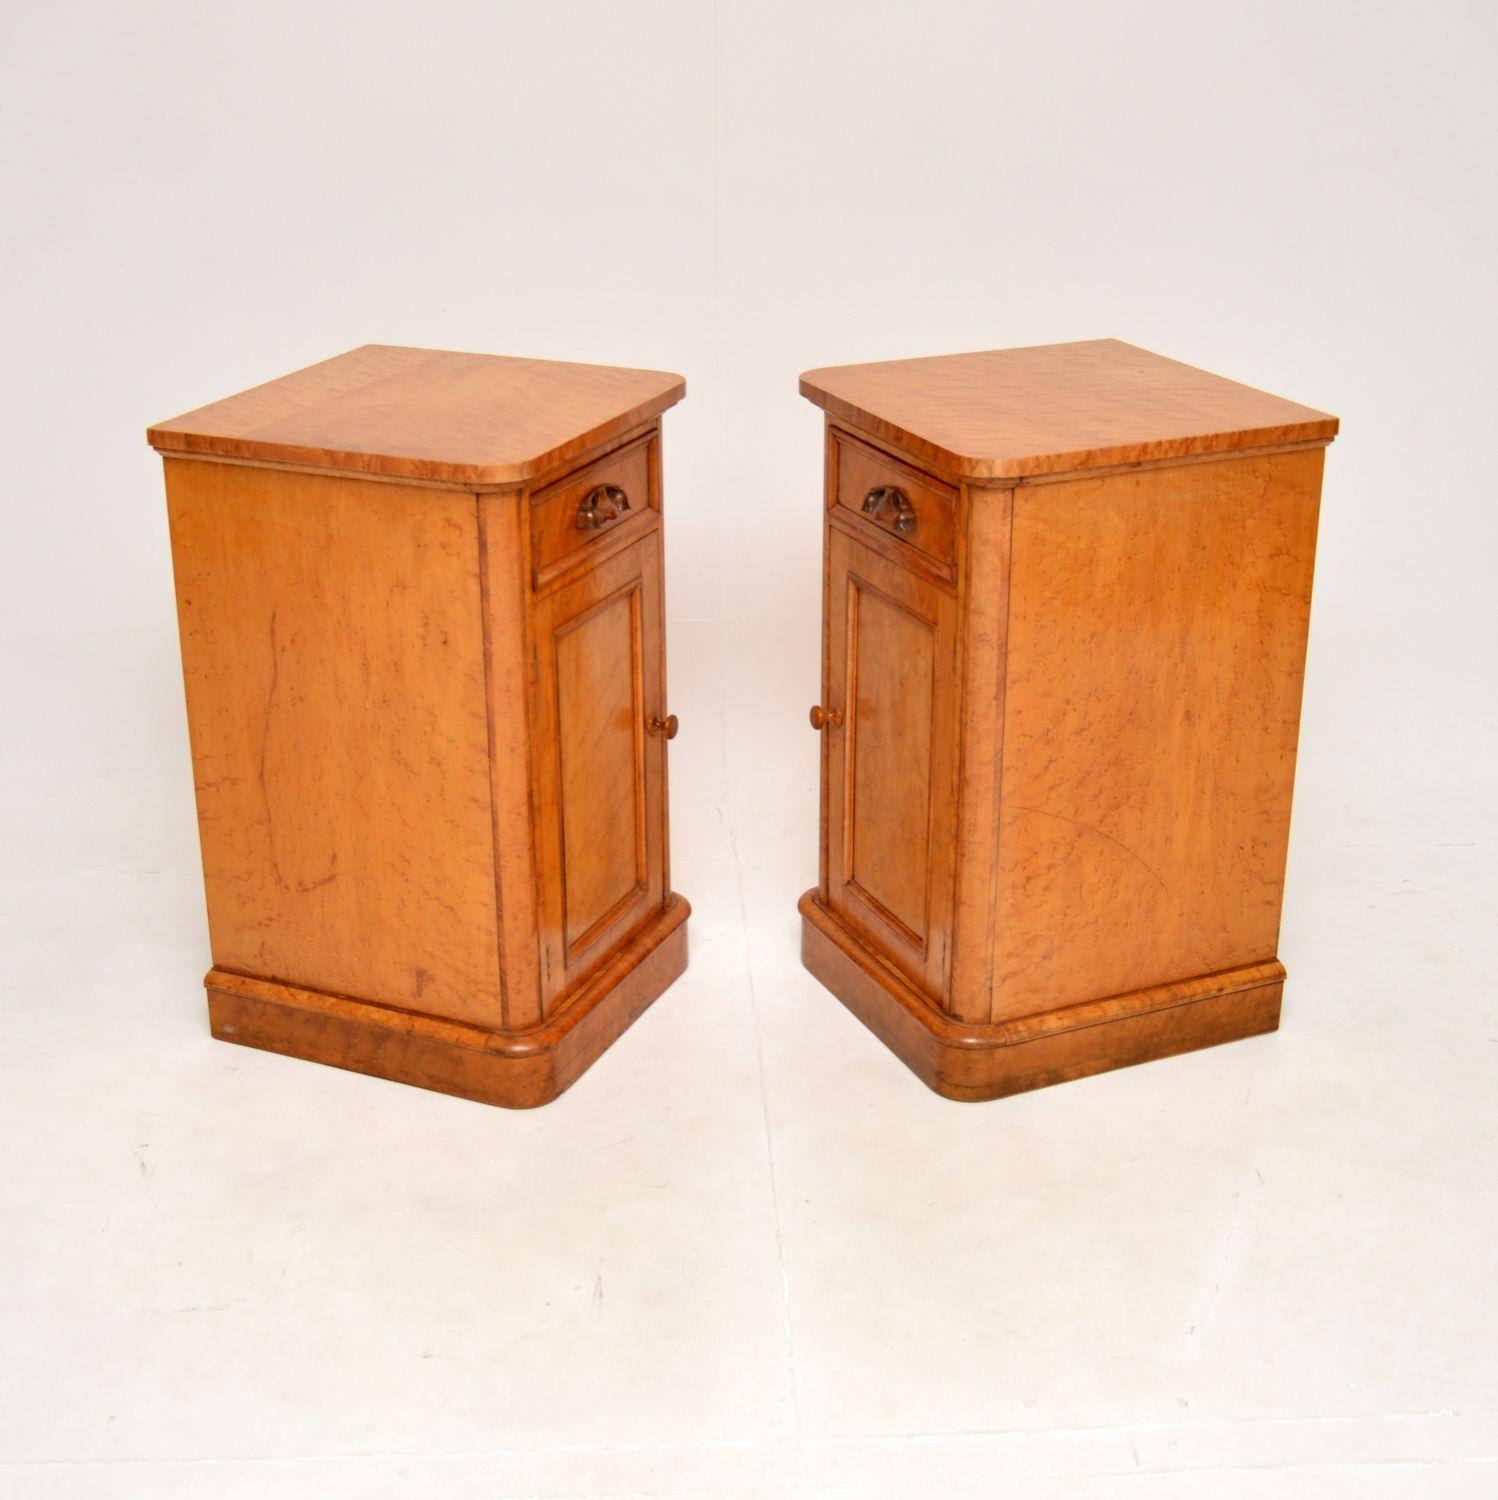 An absolutely stunning pair of antique Victorian birds eye maple bedside cabinets. They were made in England, they date from around the 1860-1880 period.

The quality is outstanding, they are extremely well made and are an impressive and useful